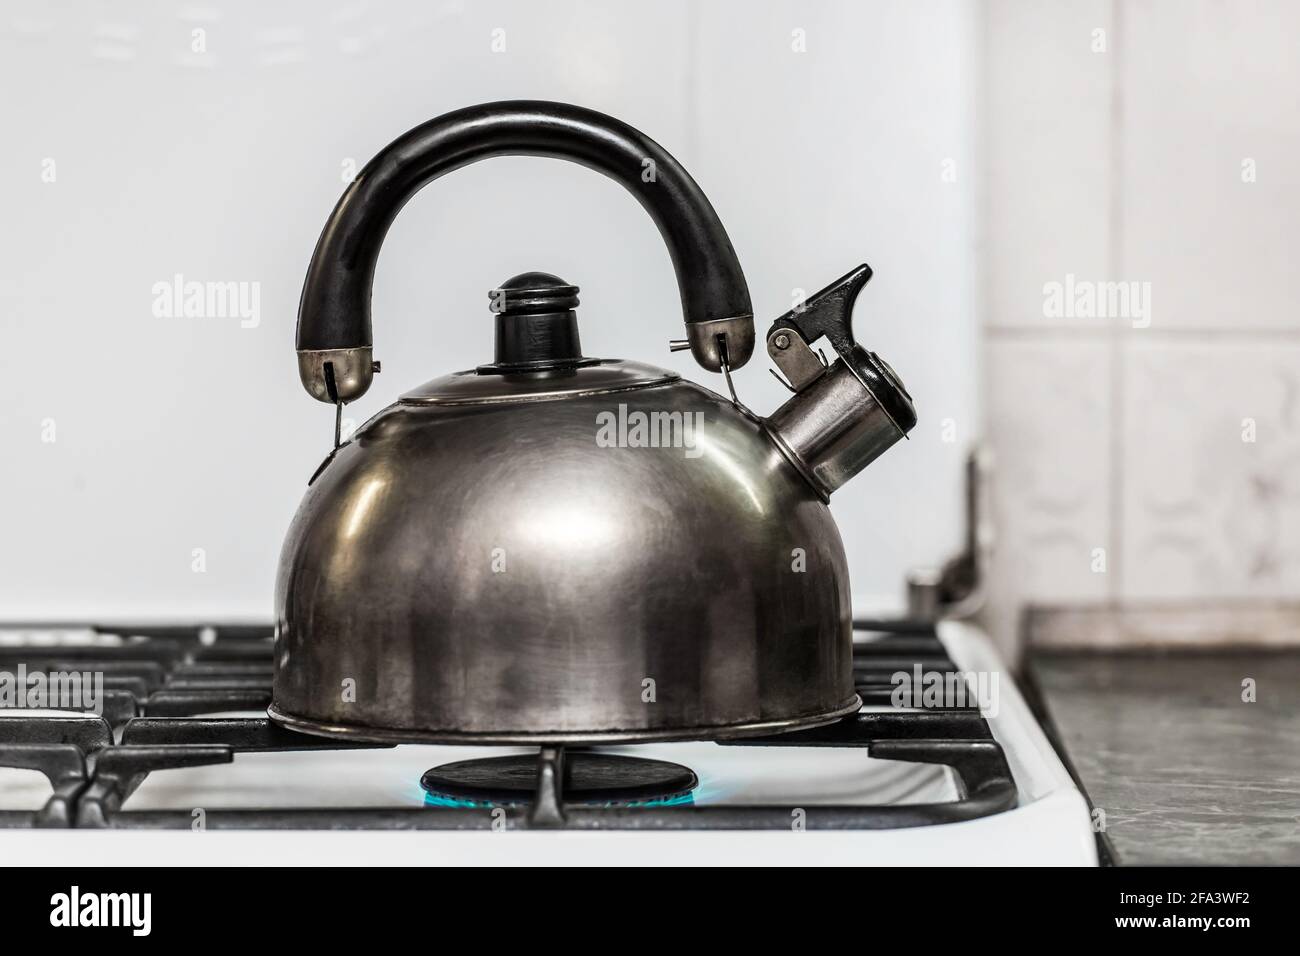 https://c8.alamy.com/comp/2FA3WF2/a-metal-dark-kettle-with-a-whistle-heats-the-water-to-a-boil-on-a-gas-stove-in-the-kitchen-2FA3WF2.jpg